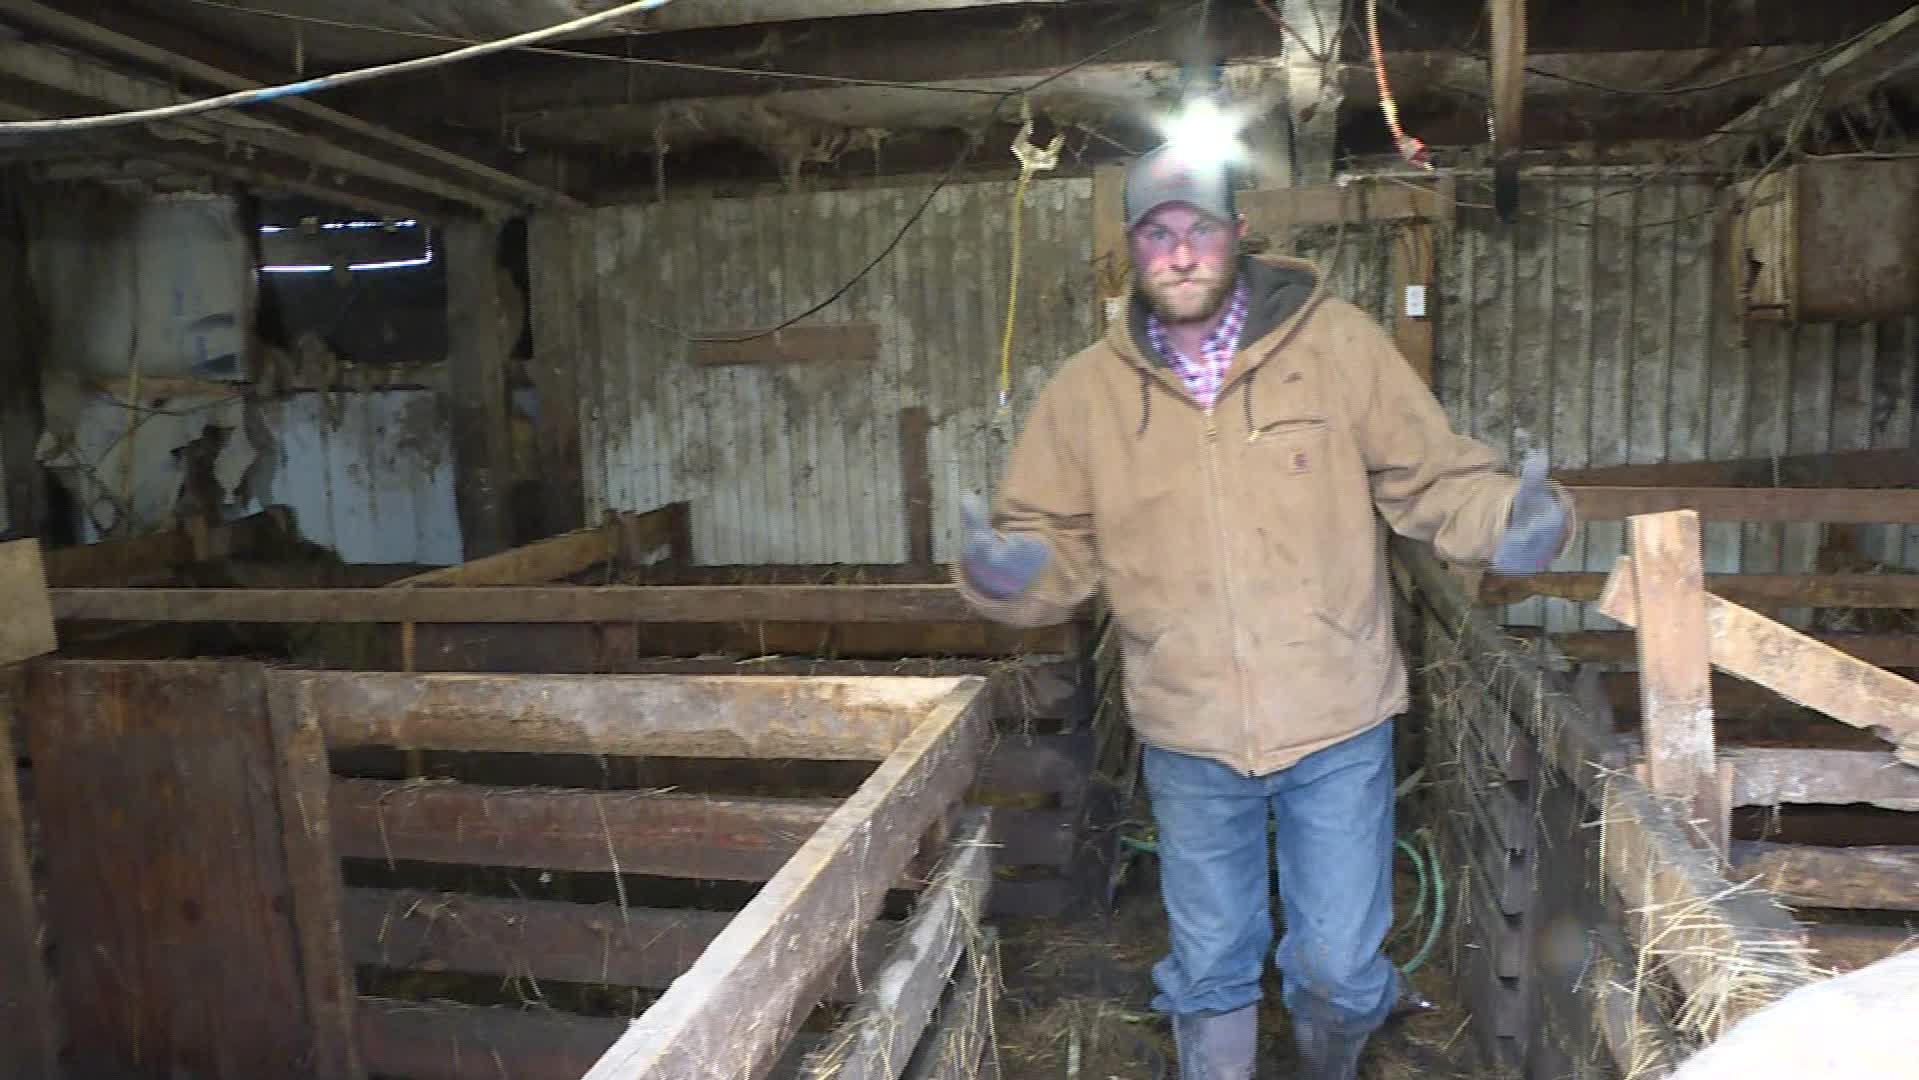 Eric Alberts said many hogs drowned in this barn.